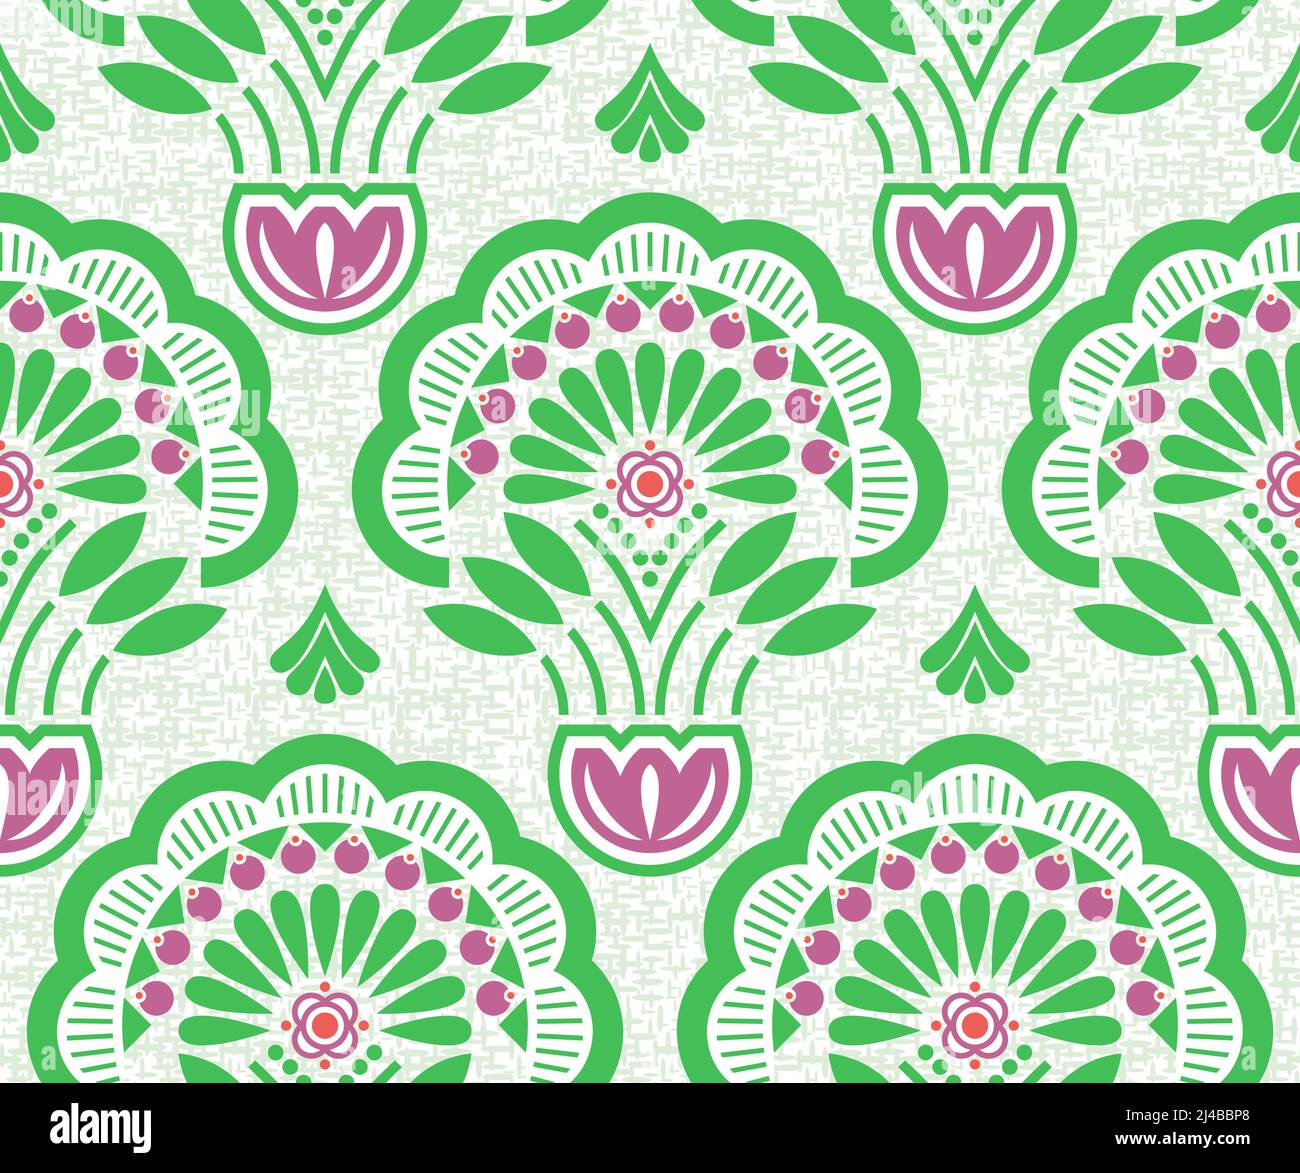 Modern stylized floral geometric with texture represents blooming spring nature, greenery, plant life, growing plants, lush green vegetation in summer Stock Vector